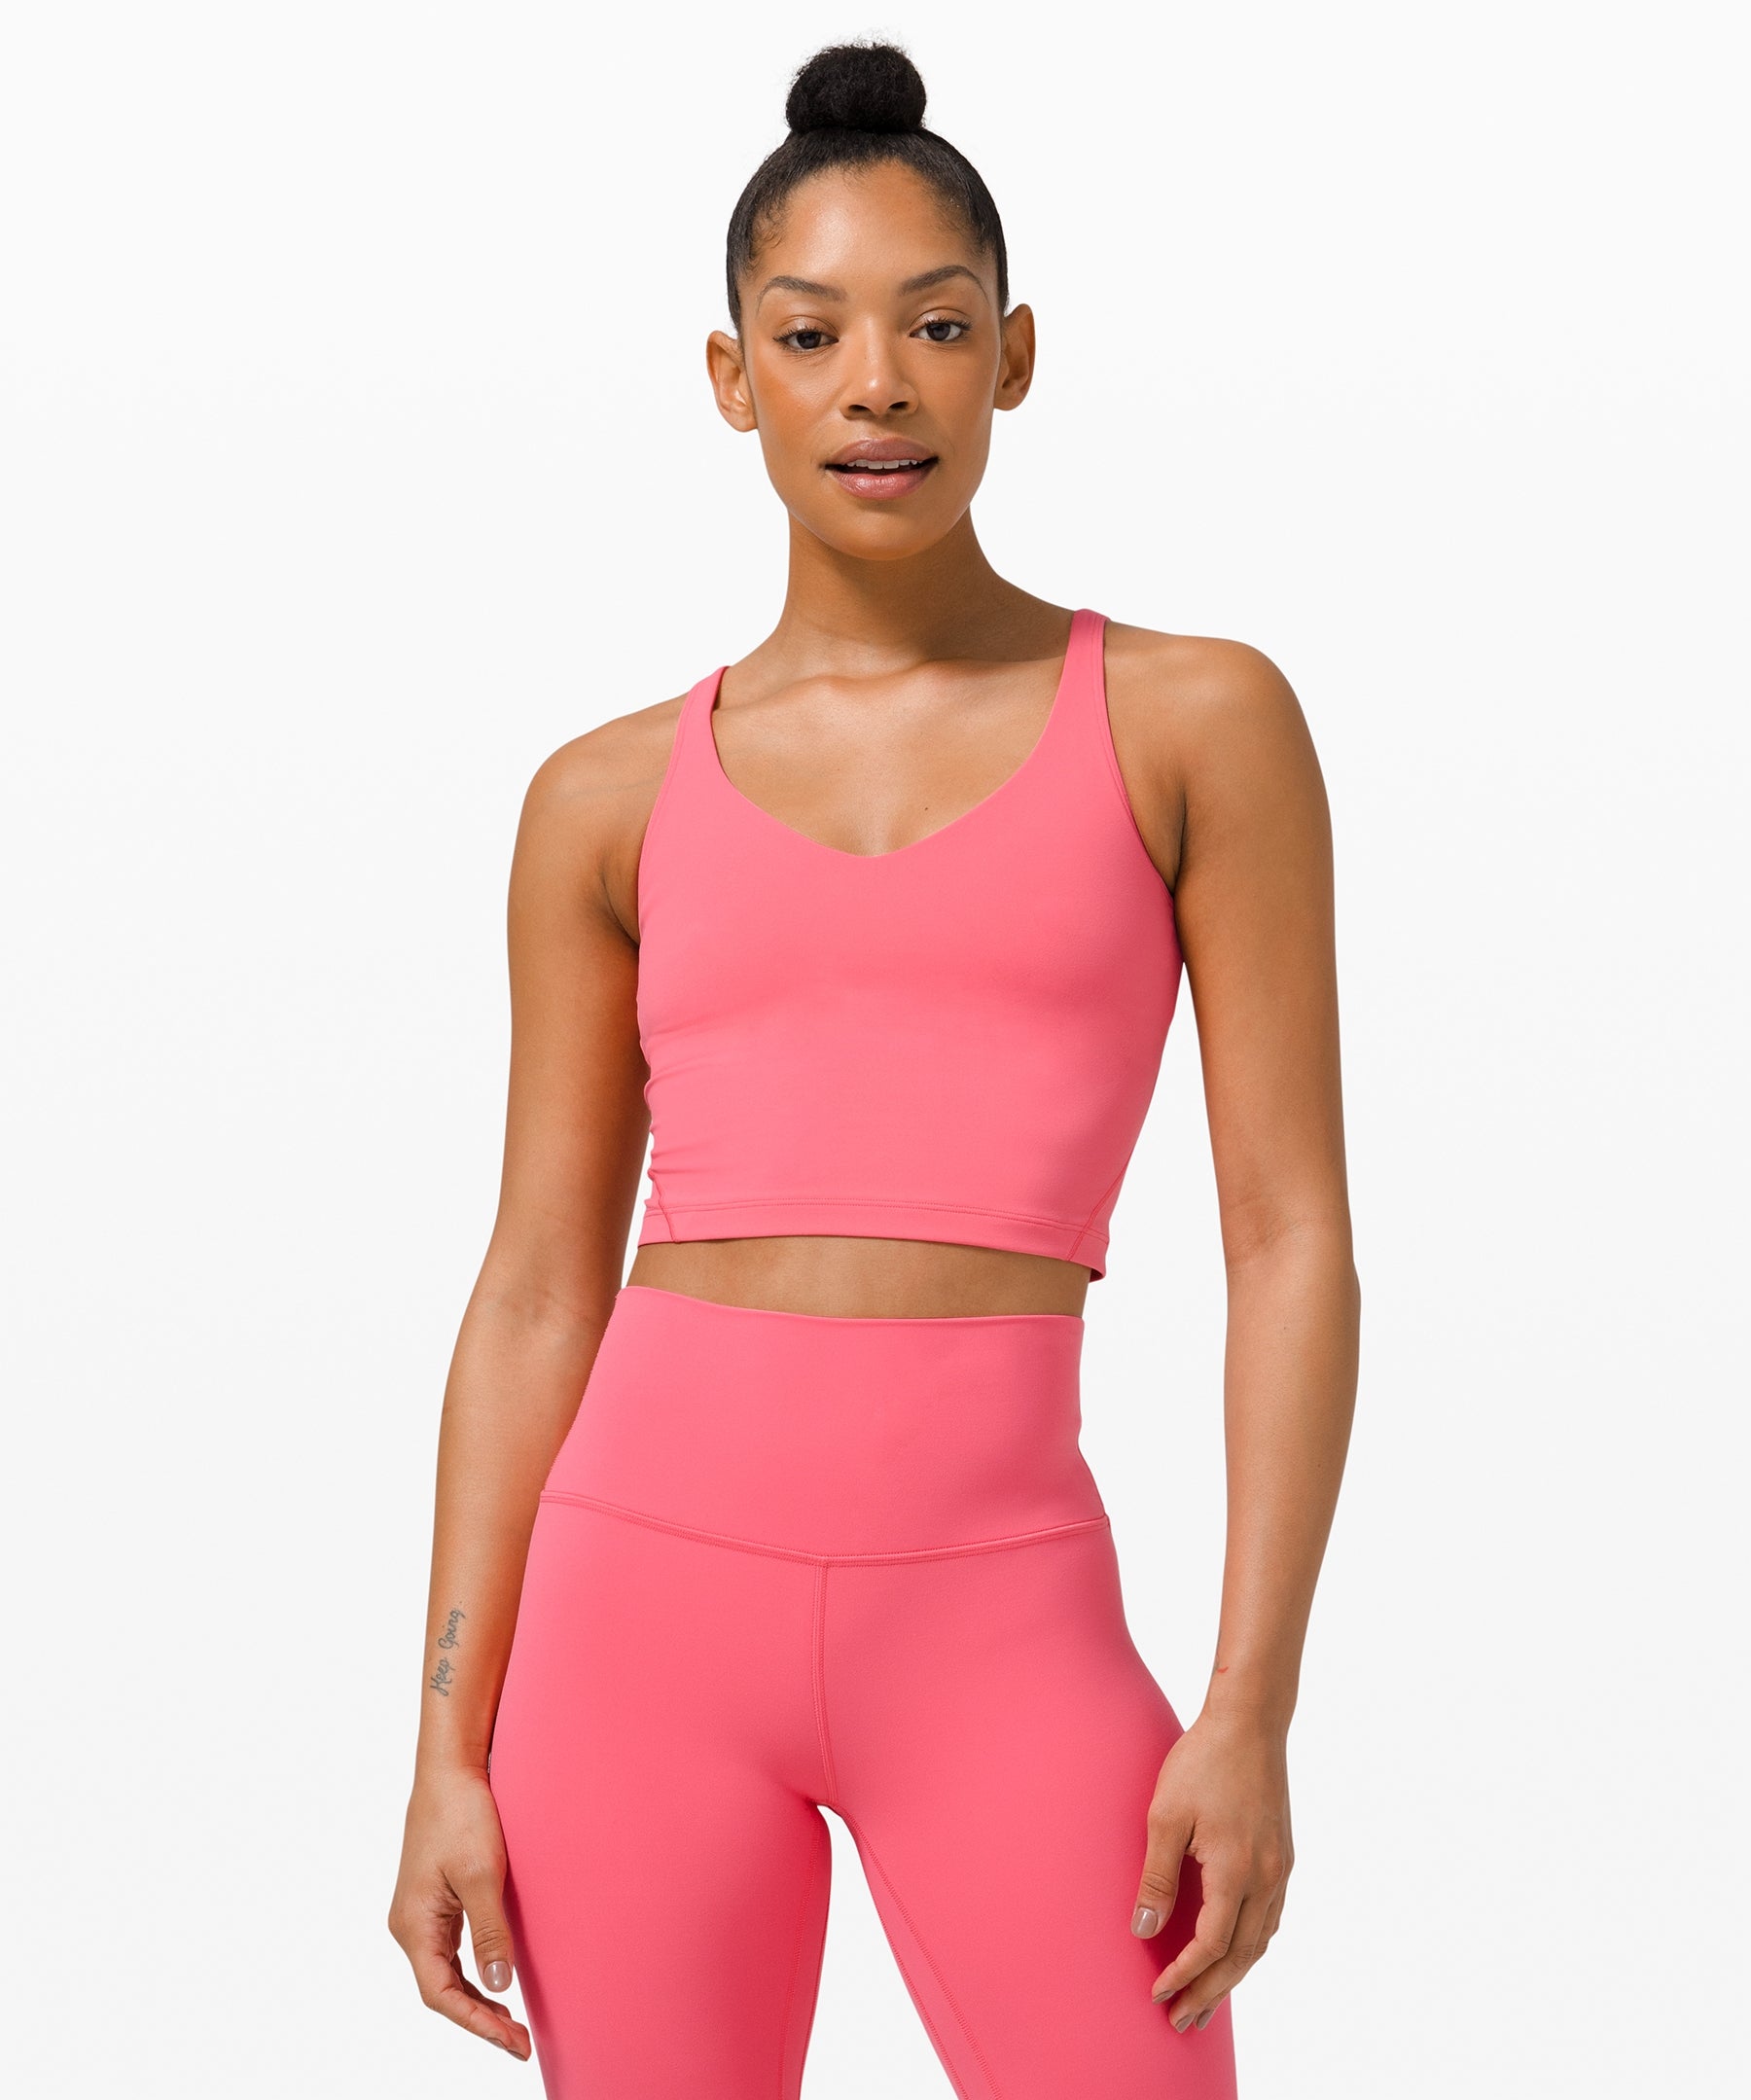 is the lululemon align tank worth it to consider